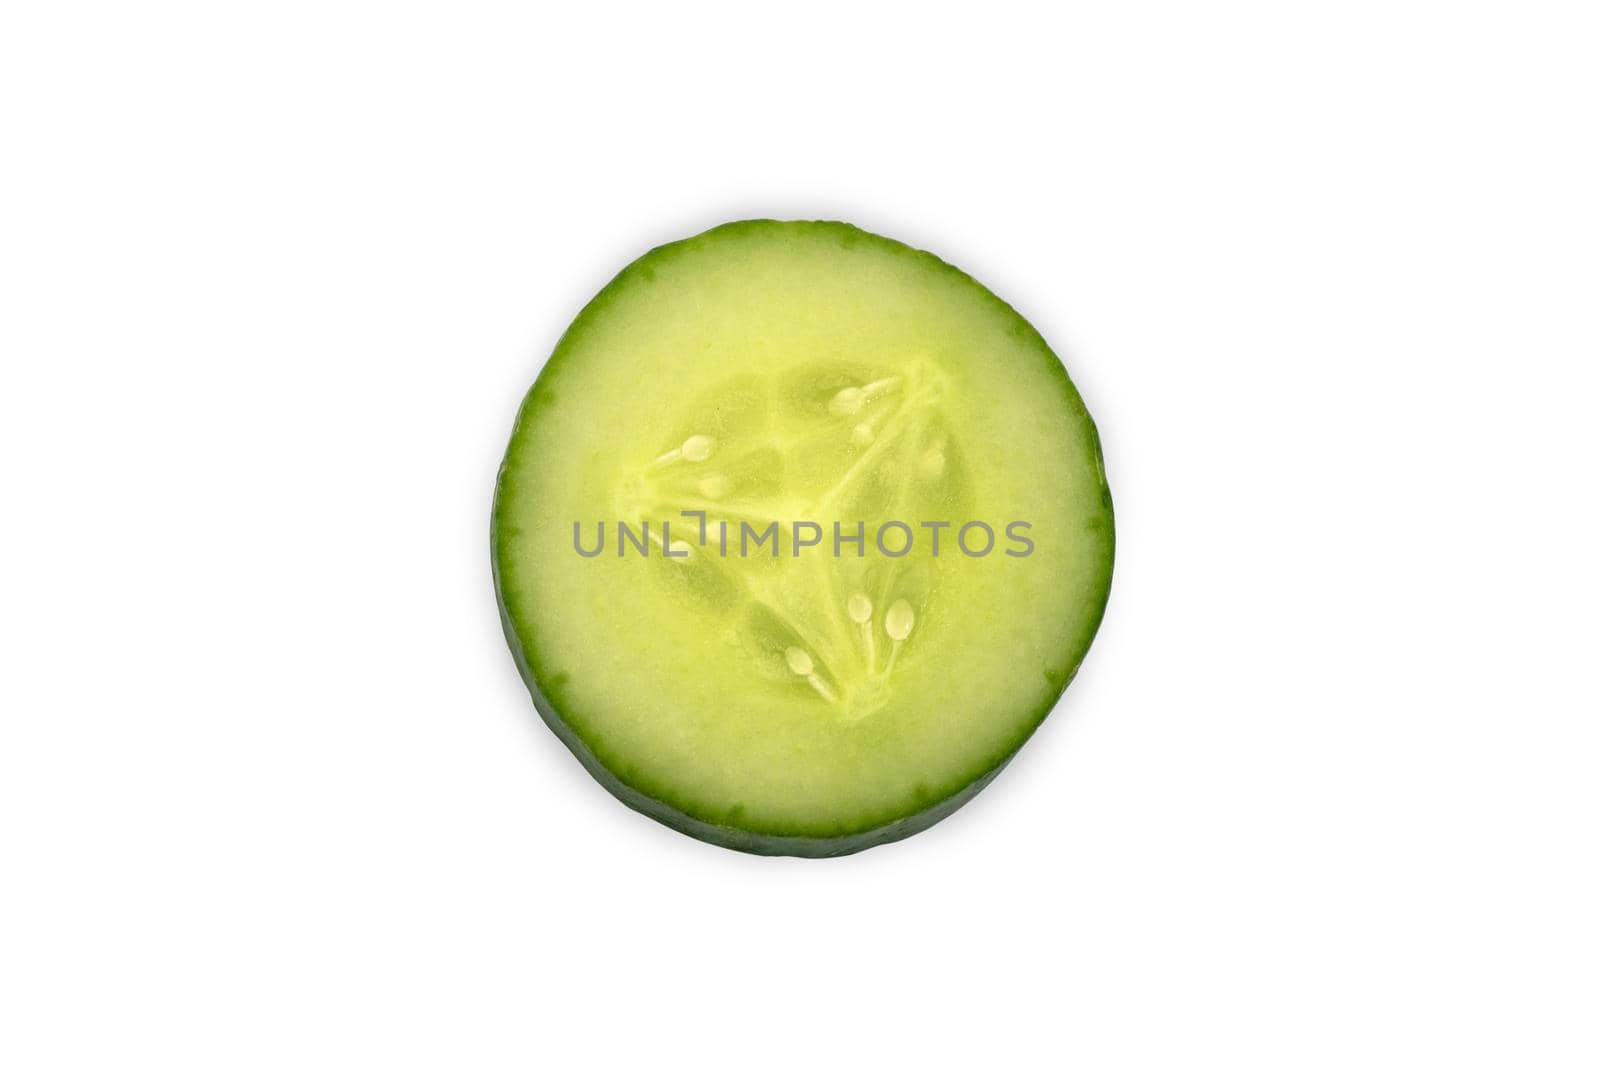 Freshly sliced cucumber close-up on a white background